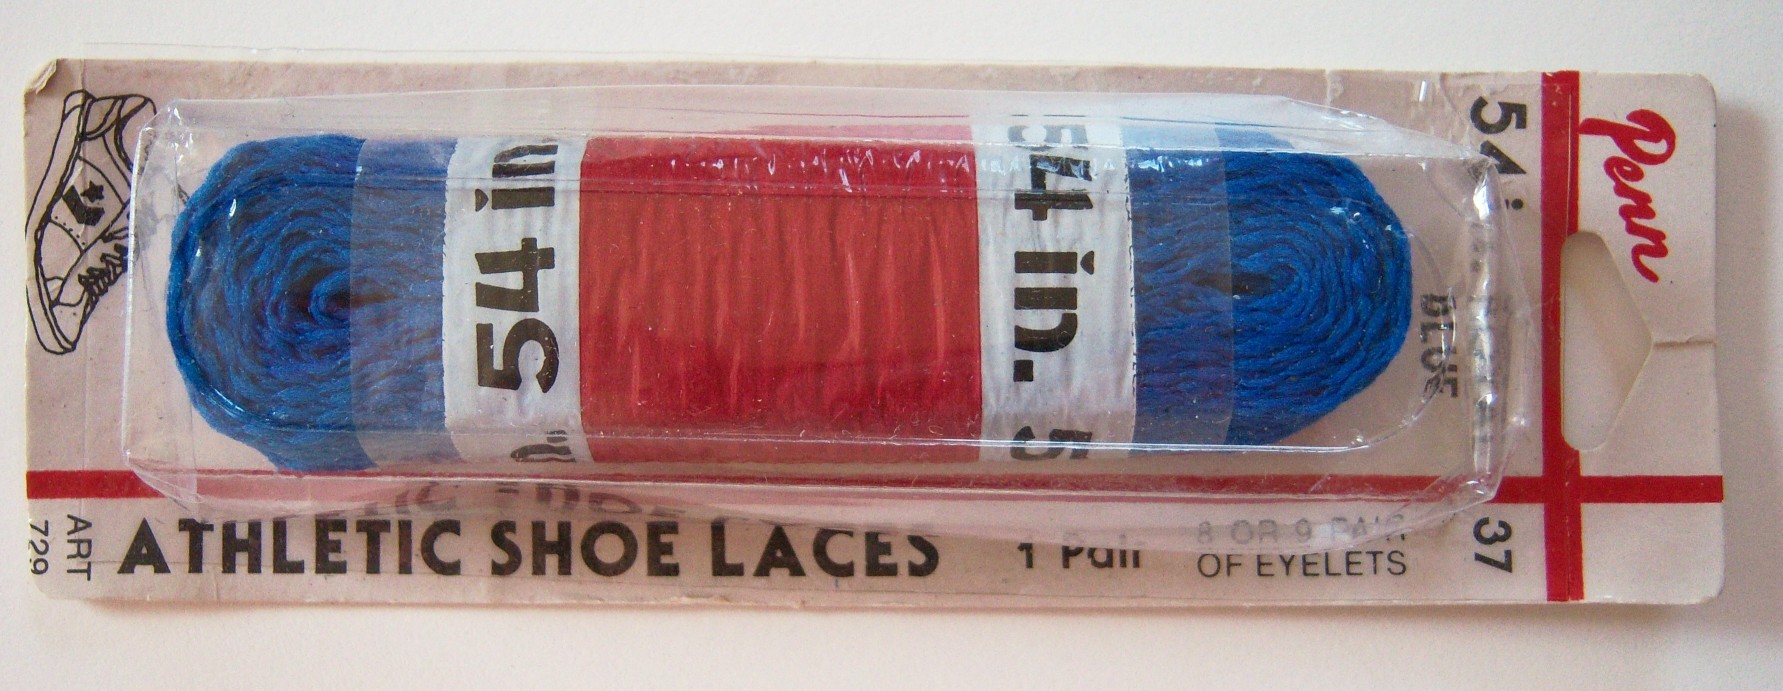 Royal Shoe Lace Pair 54" Package